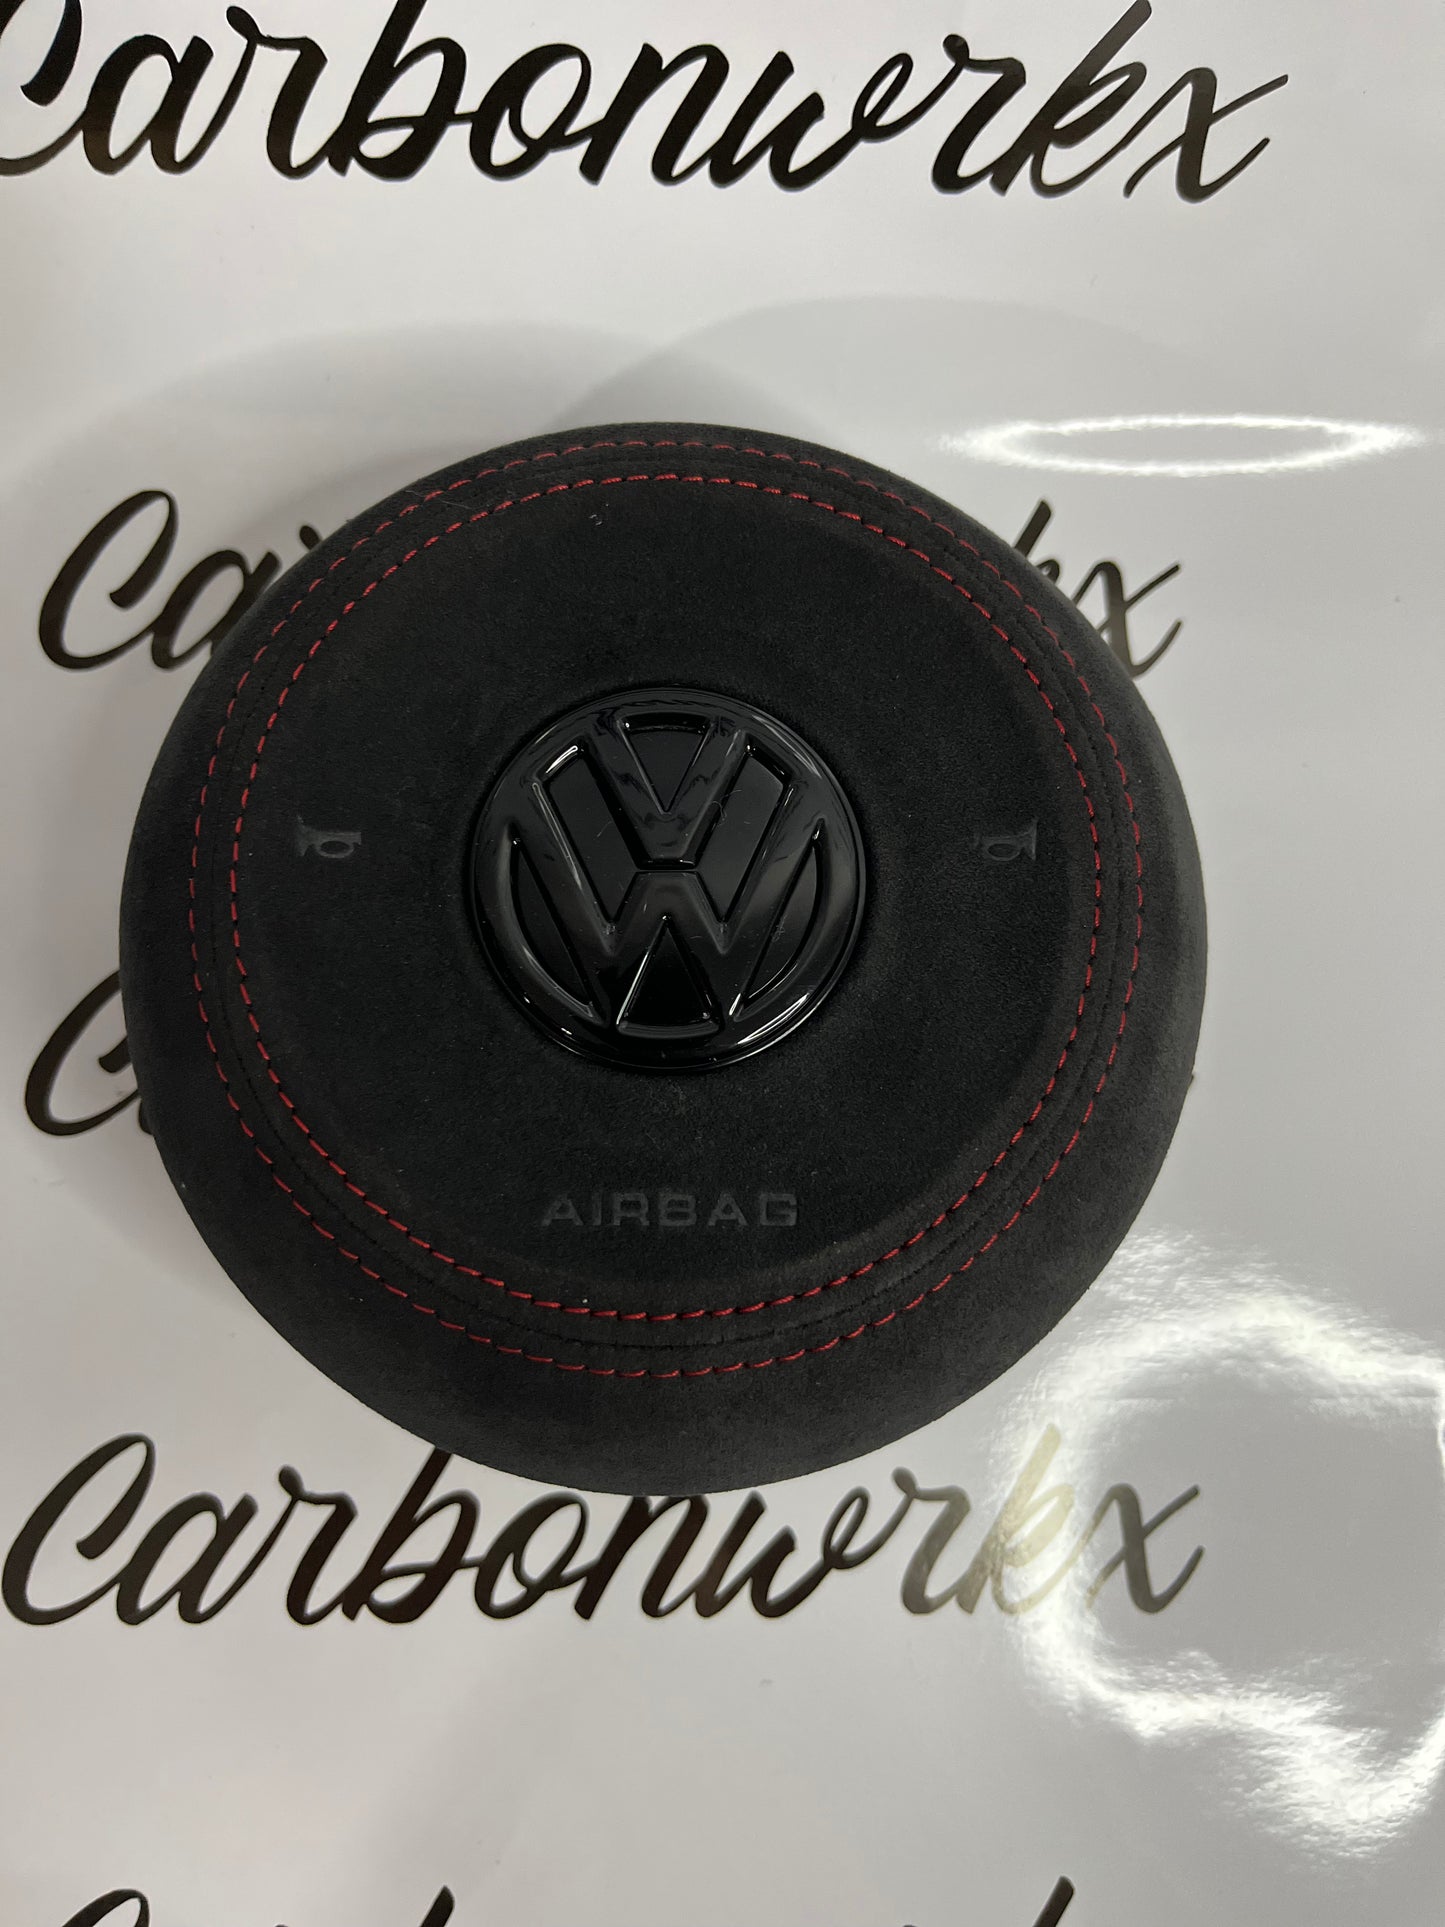 cWrkx/ Airbag‘s